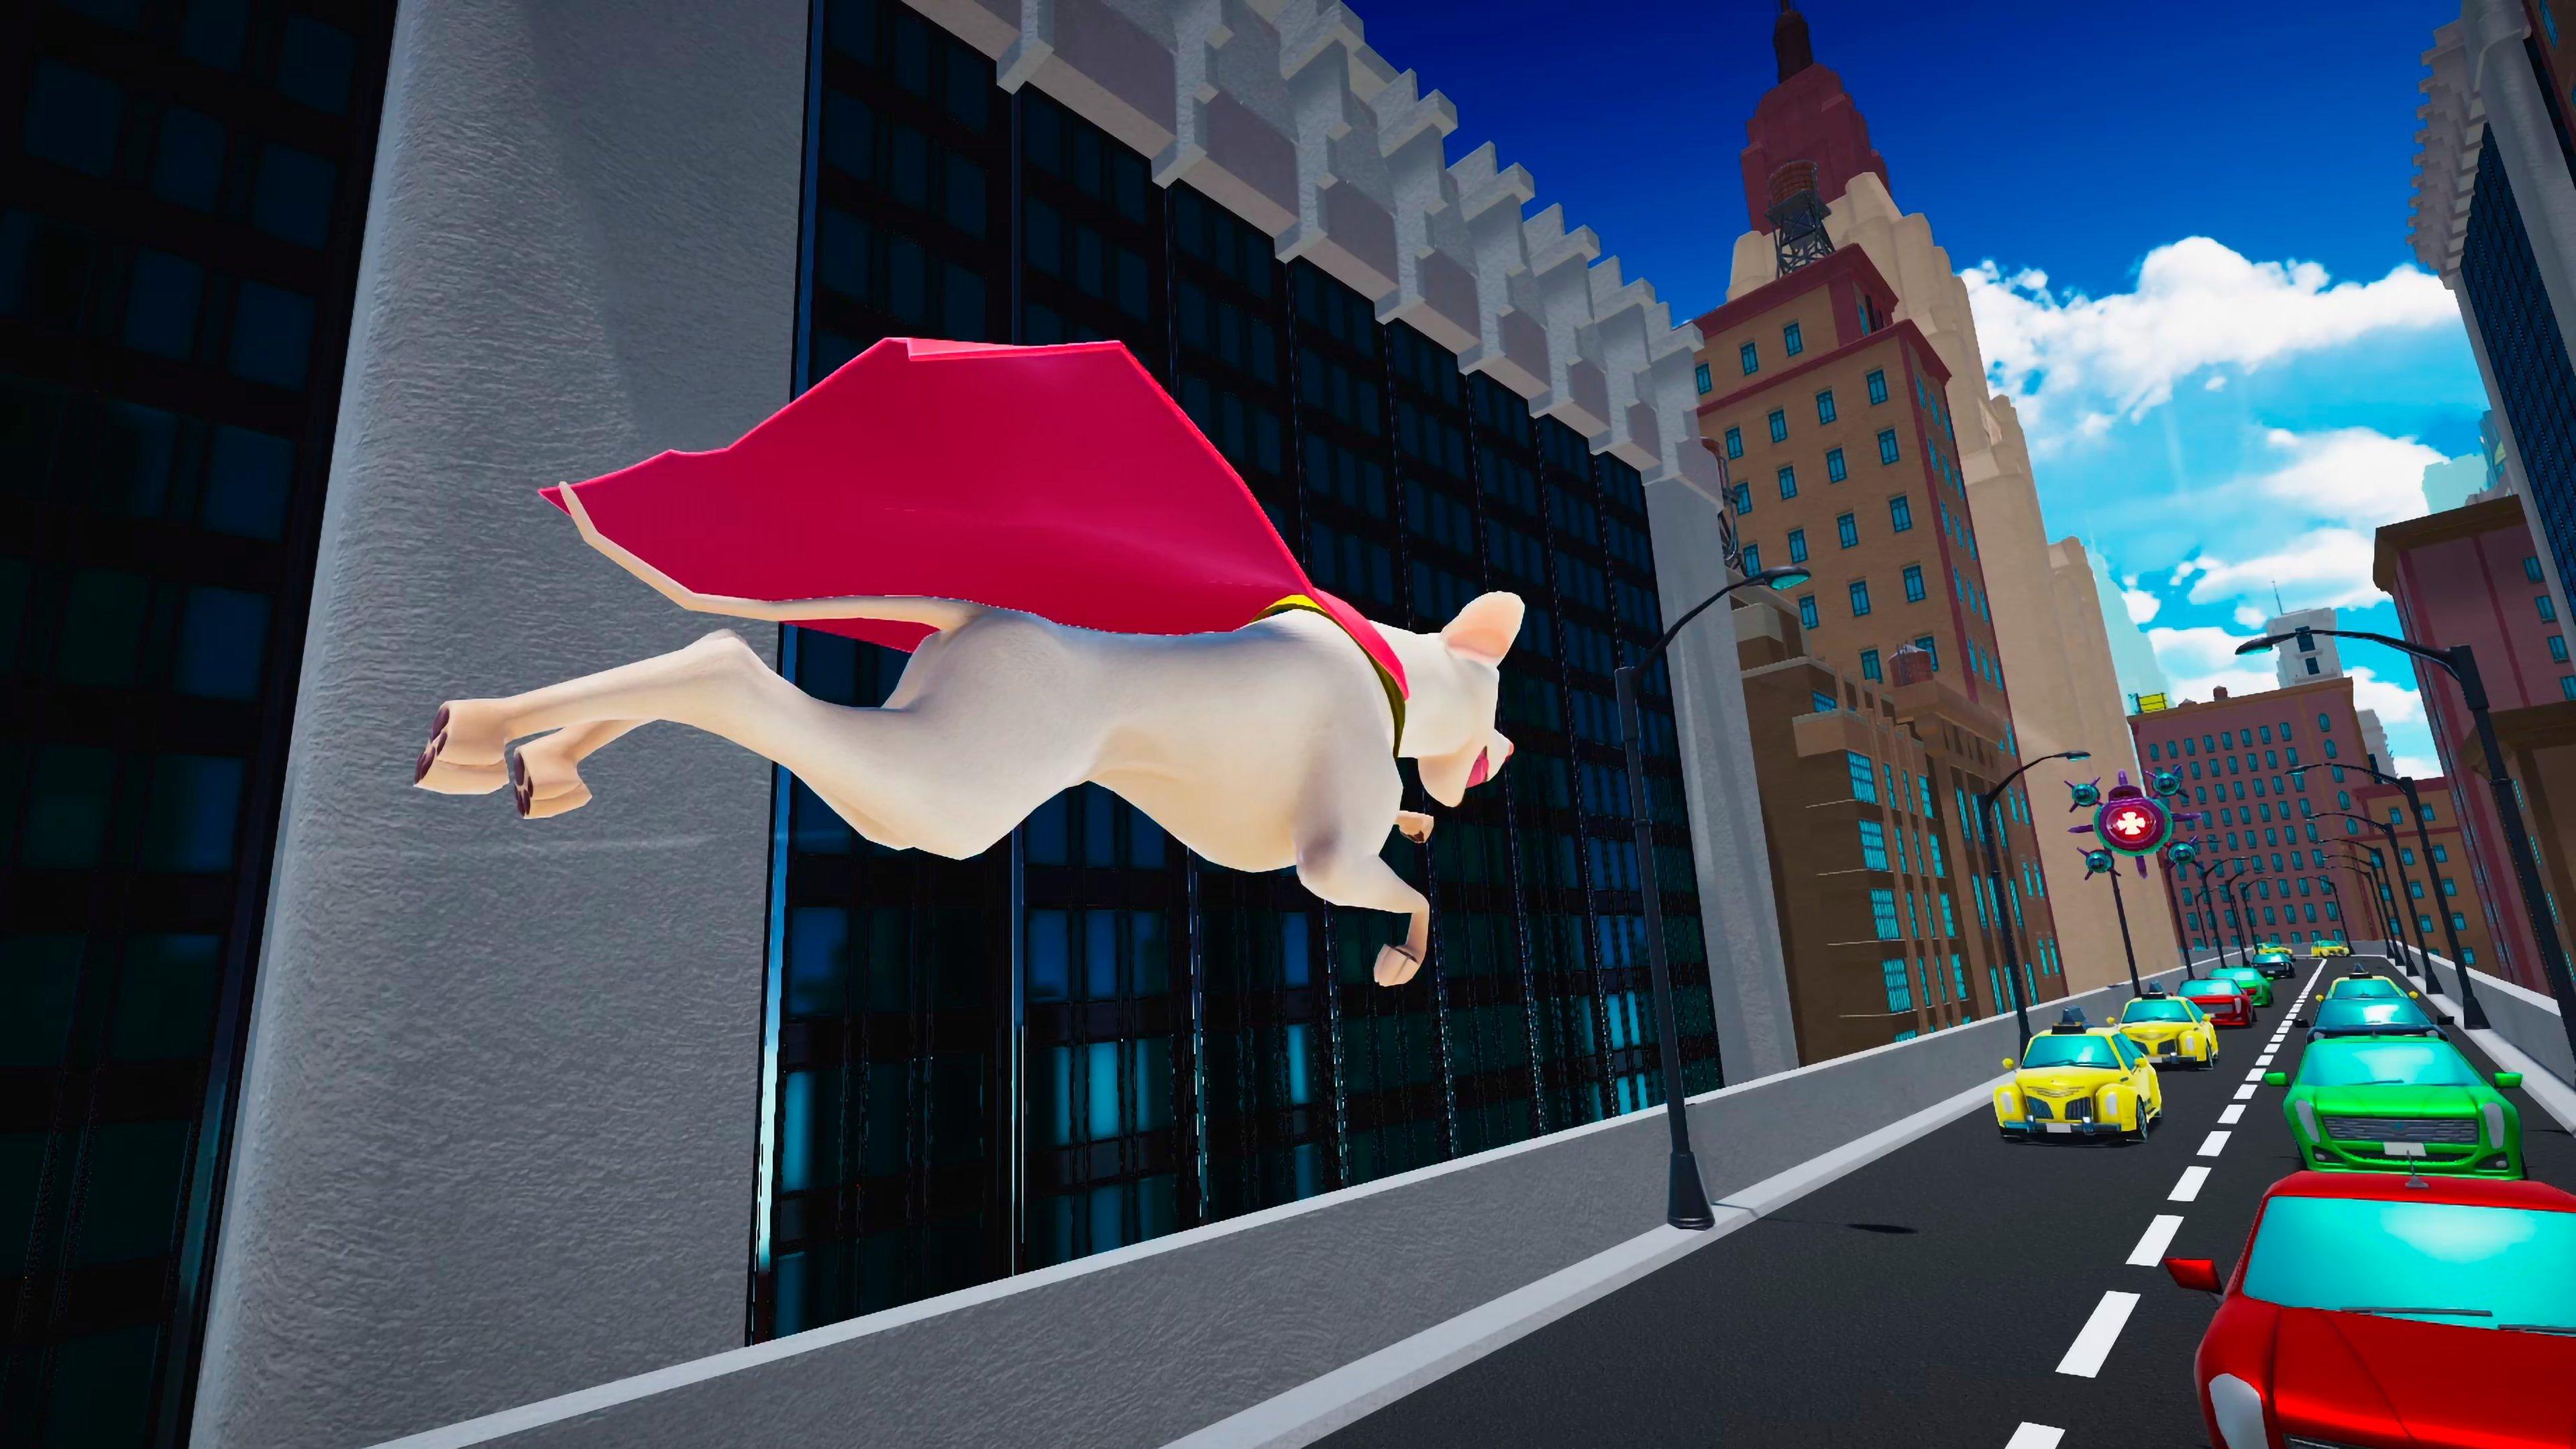 DC League of Super-Pets: The Adventures of Krypto and Ace - IGN